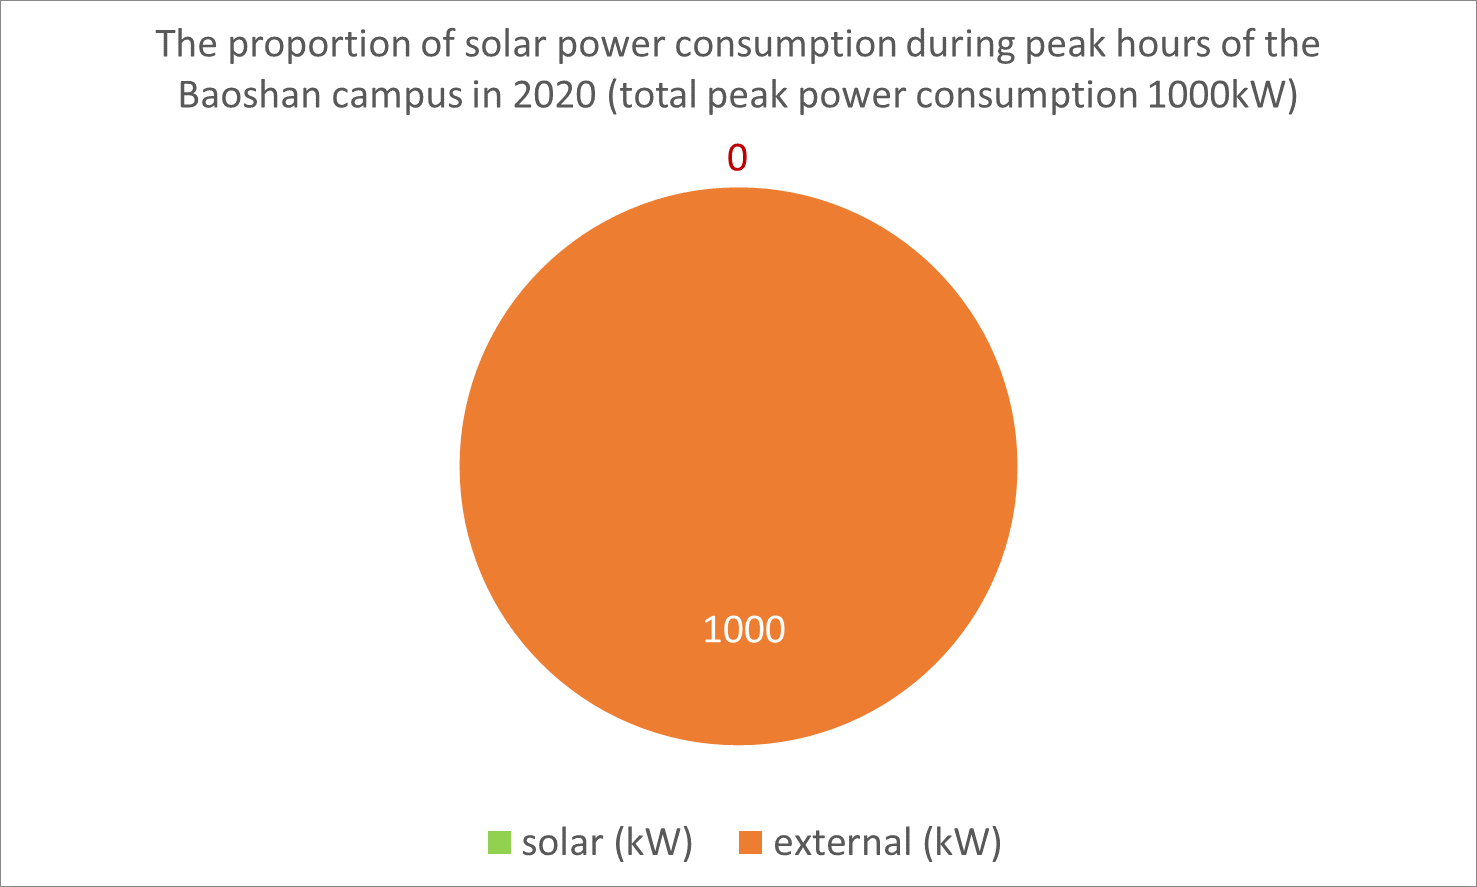 Figure 4. The proportion of solar power consumption during peak hours of the Baoshan campus in 2020